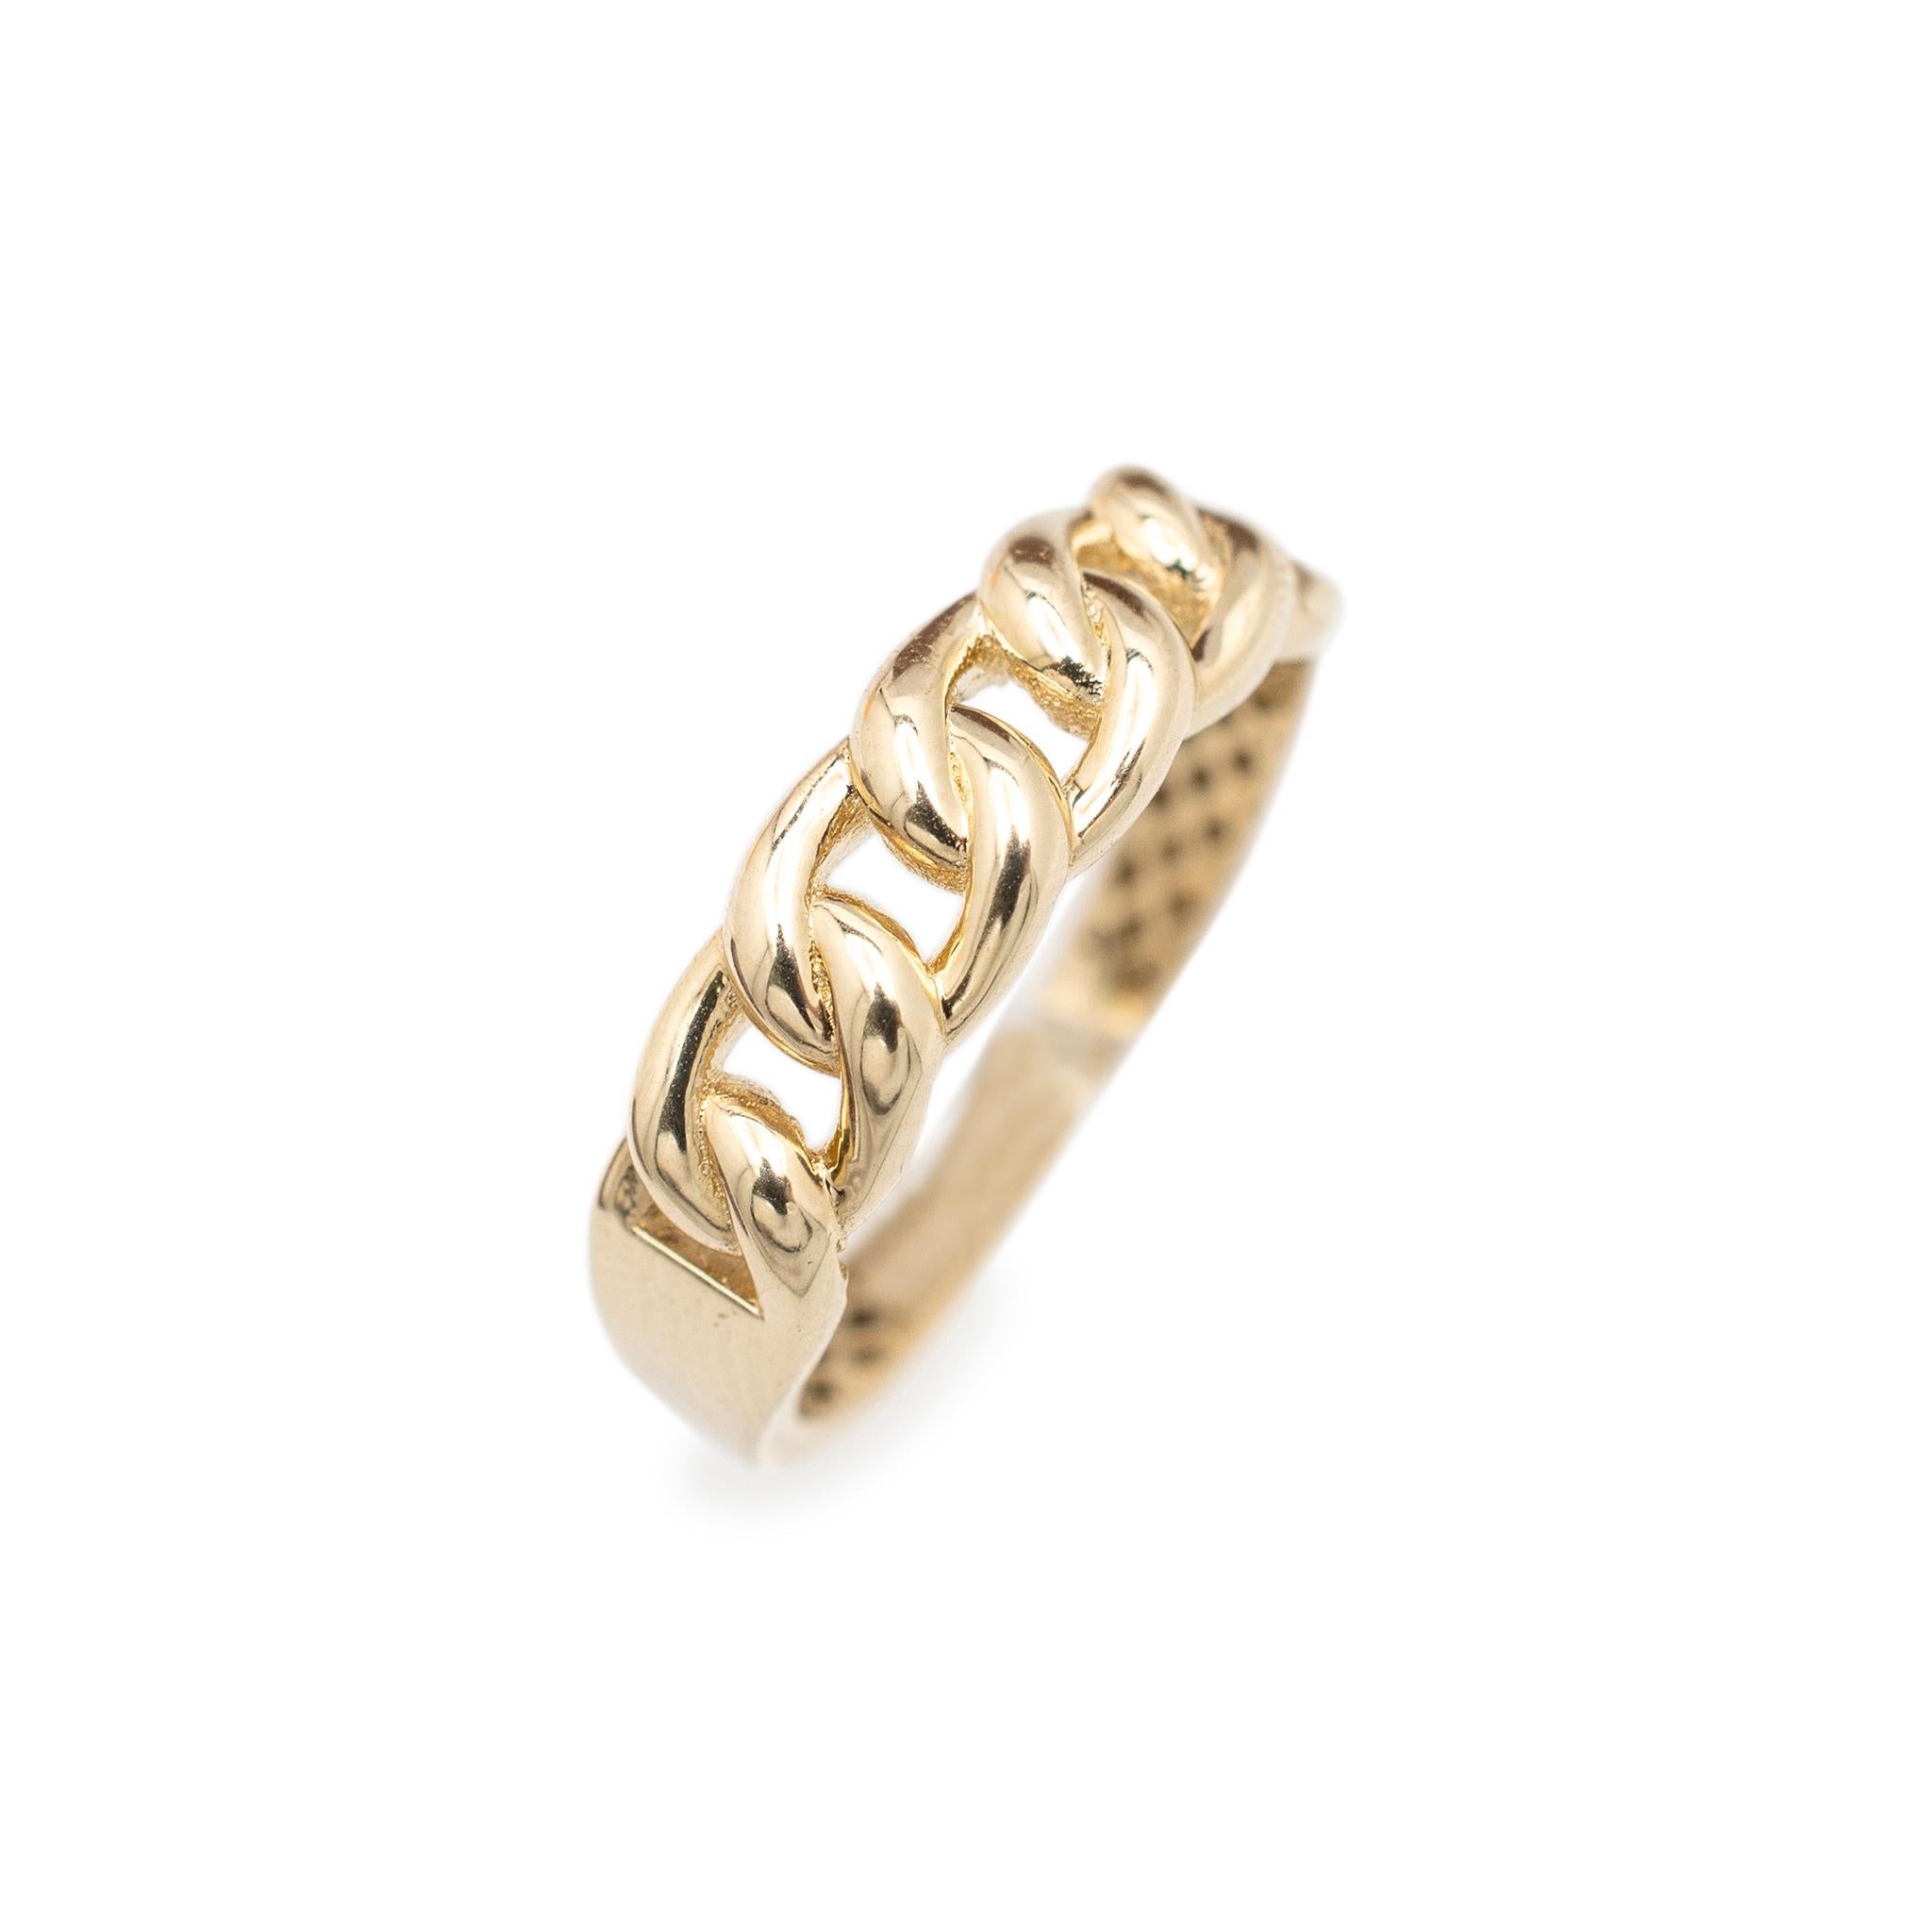 Gender: Unisex

Metal Type: 14K Yellow Gold

Size: 7.5

Width: 5.60 mm

Weight: 2.00 grams

Unisex  14K yellow gold ring with a half round shank. Engraved with 